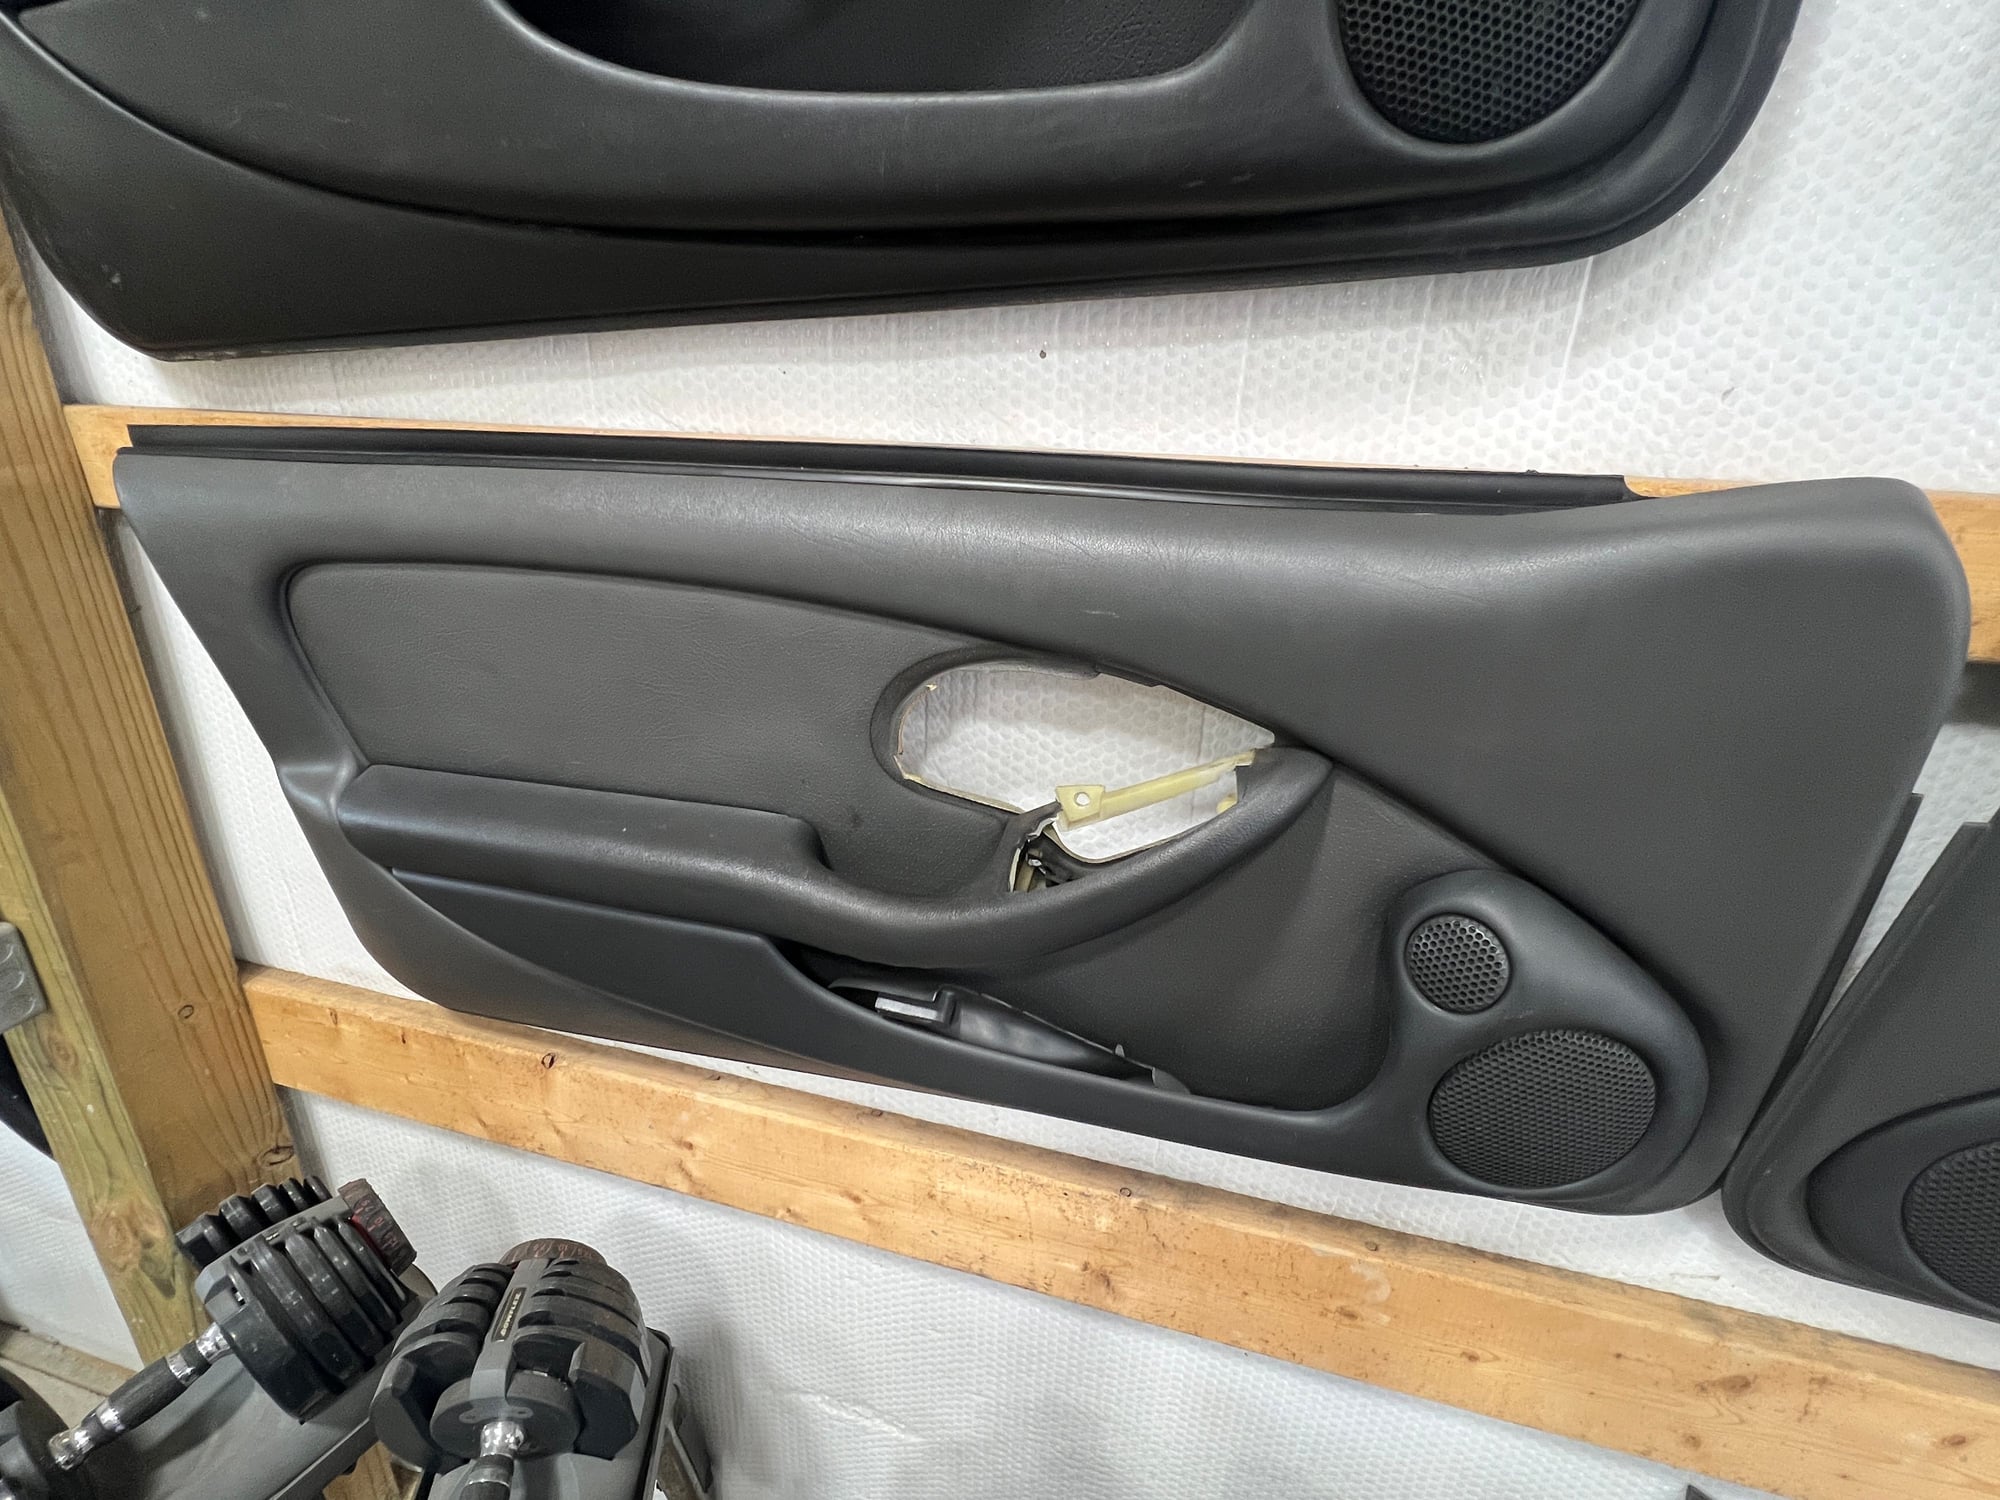 Interior/Upholstery - 97-99 grey trans am door panels - Used - Owensboro, KY 42301, United States